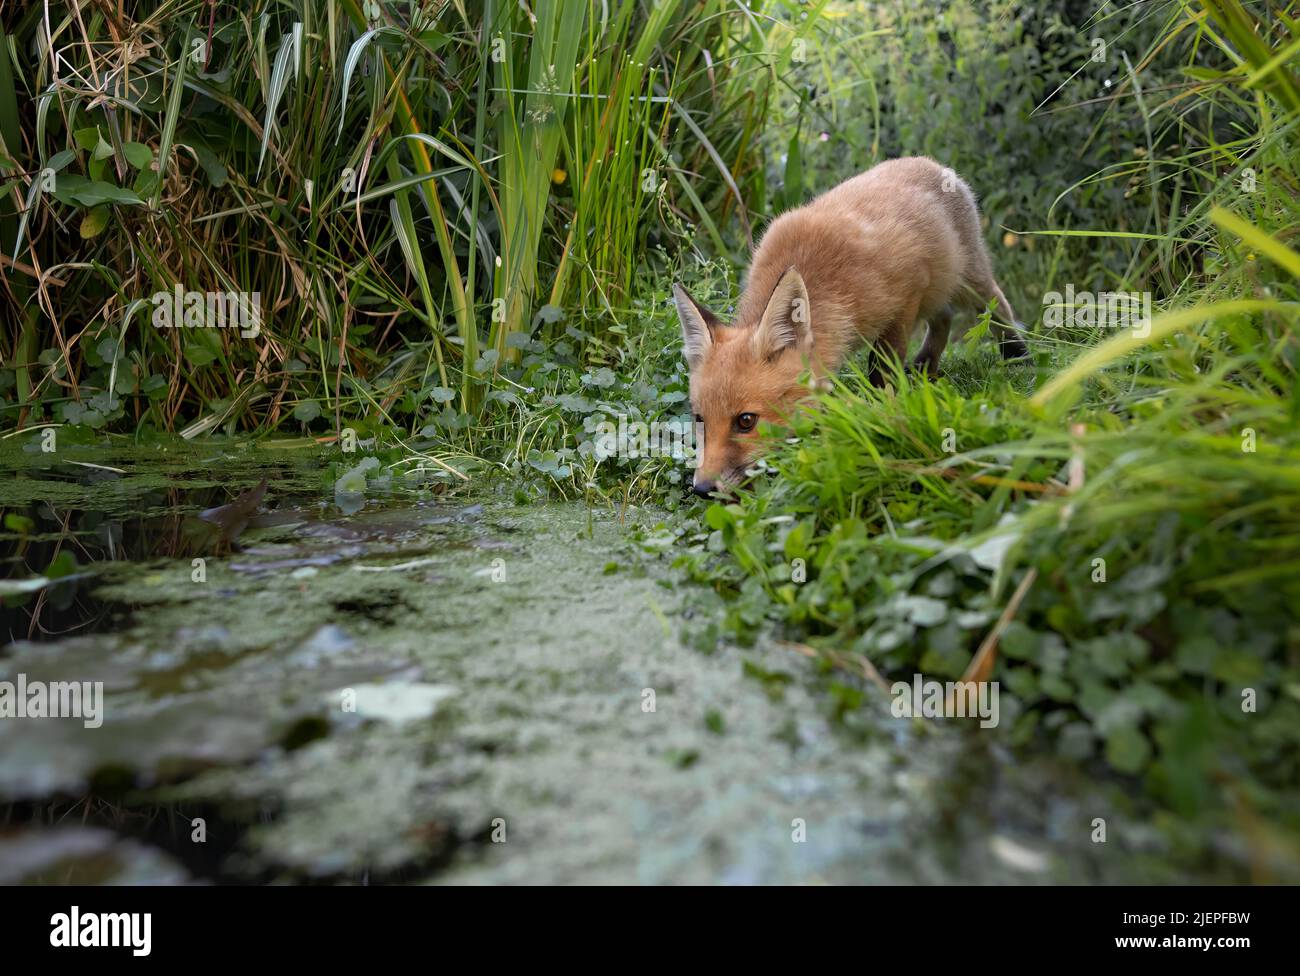 A young wild Red Fox cub (Vulpes vulpes) having a drink from a garden pond, Warwickshire Stock Photo